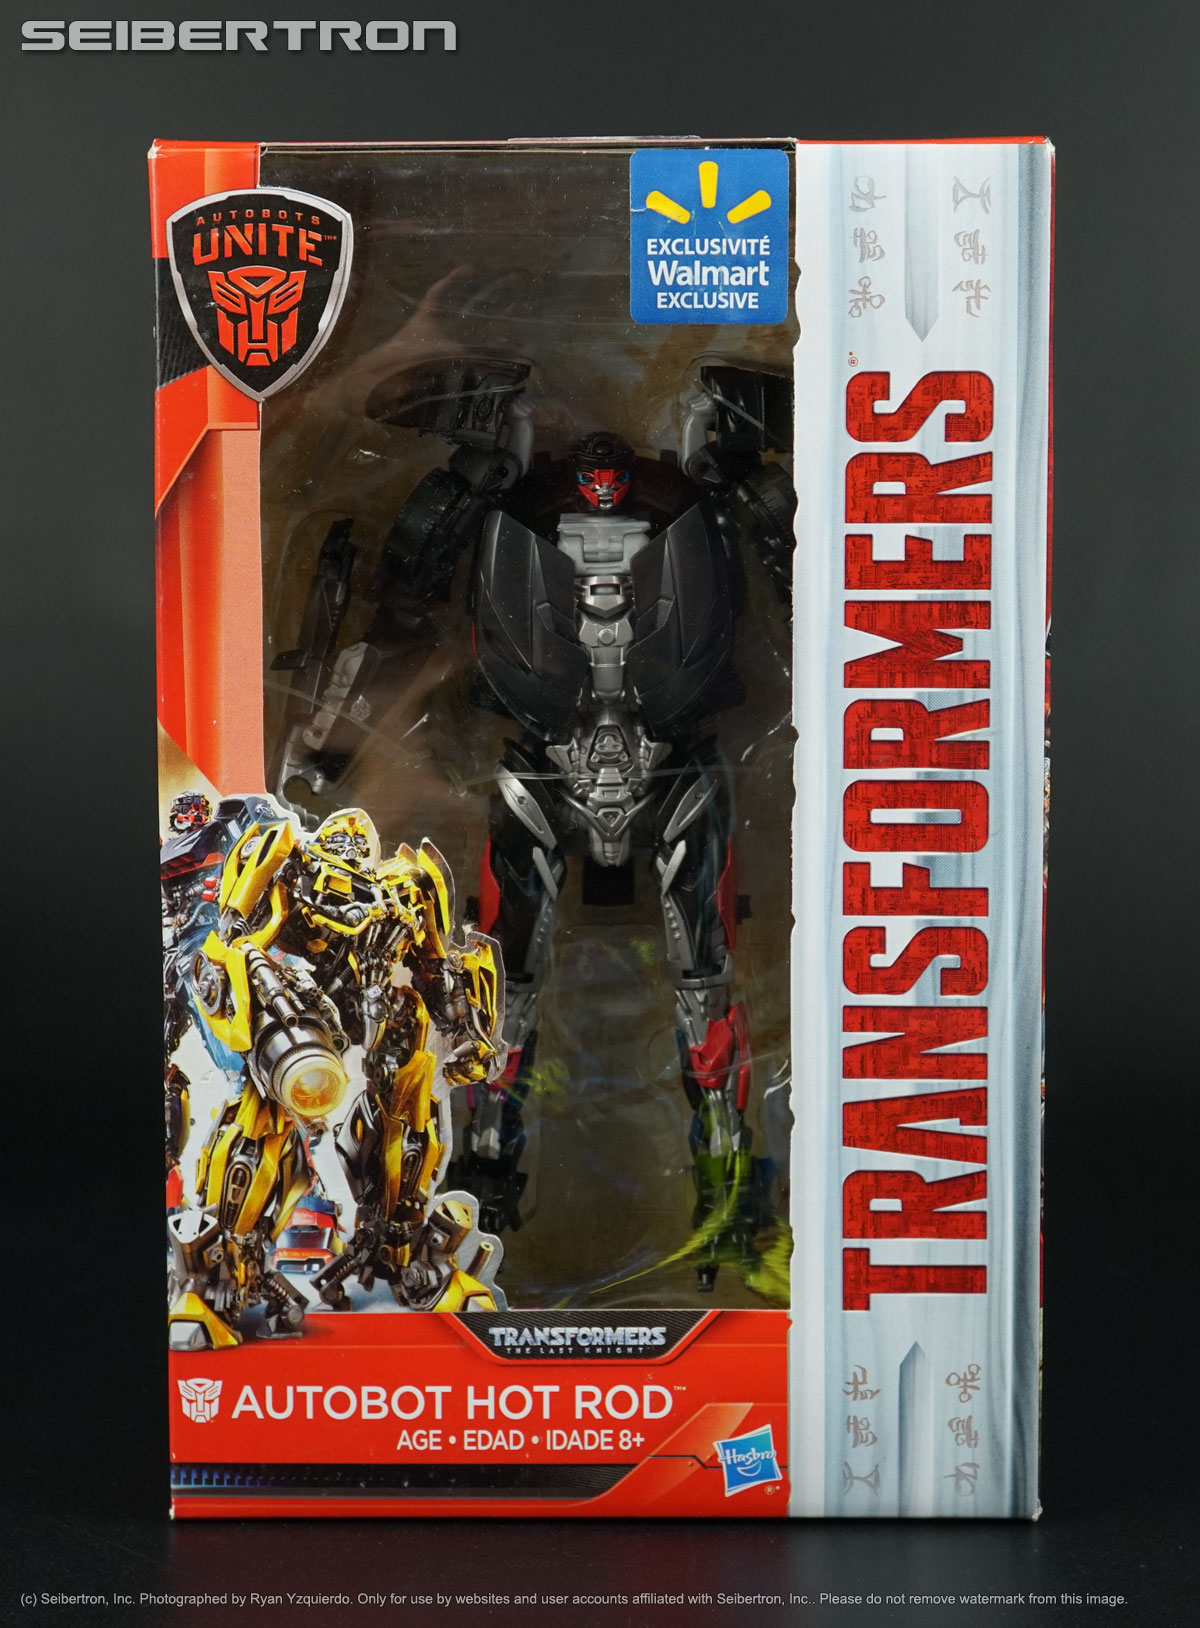 Transformers, Masters of the Universe, Teenage Mutant Ninja Turtles, Gobots, Comic Books, Shopkins, and other listings from Seibertron.com: Deluxe Class HOT ROD Transformers The Last Knight Autobots Unite Hasbro New 2017 Walmart Exclusive